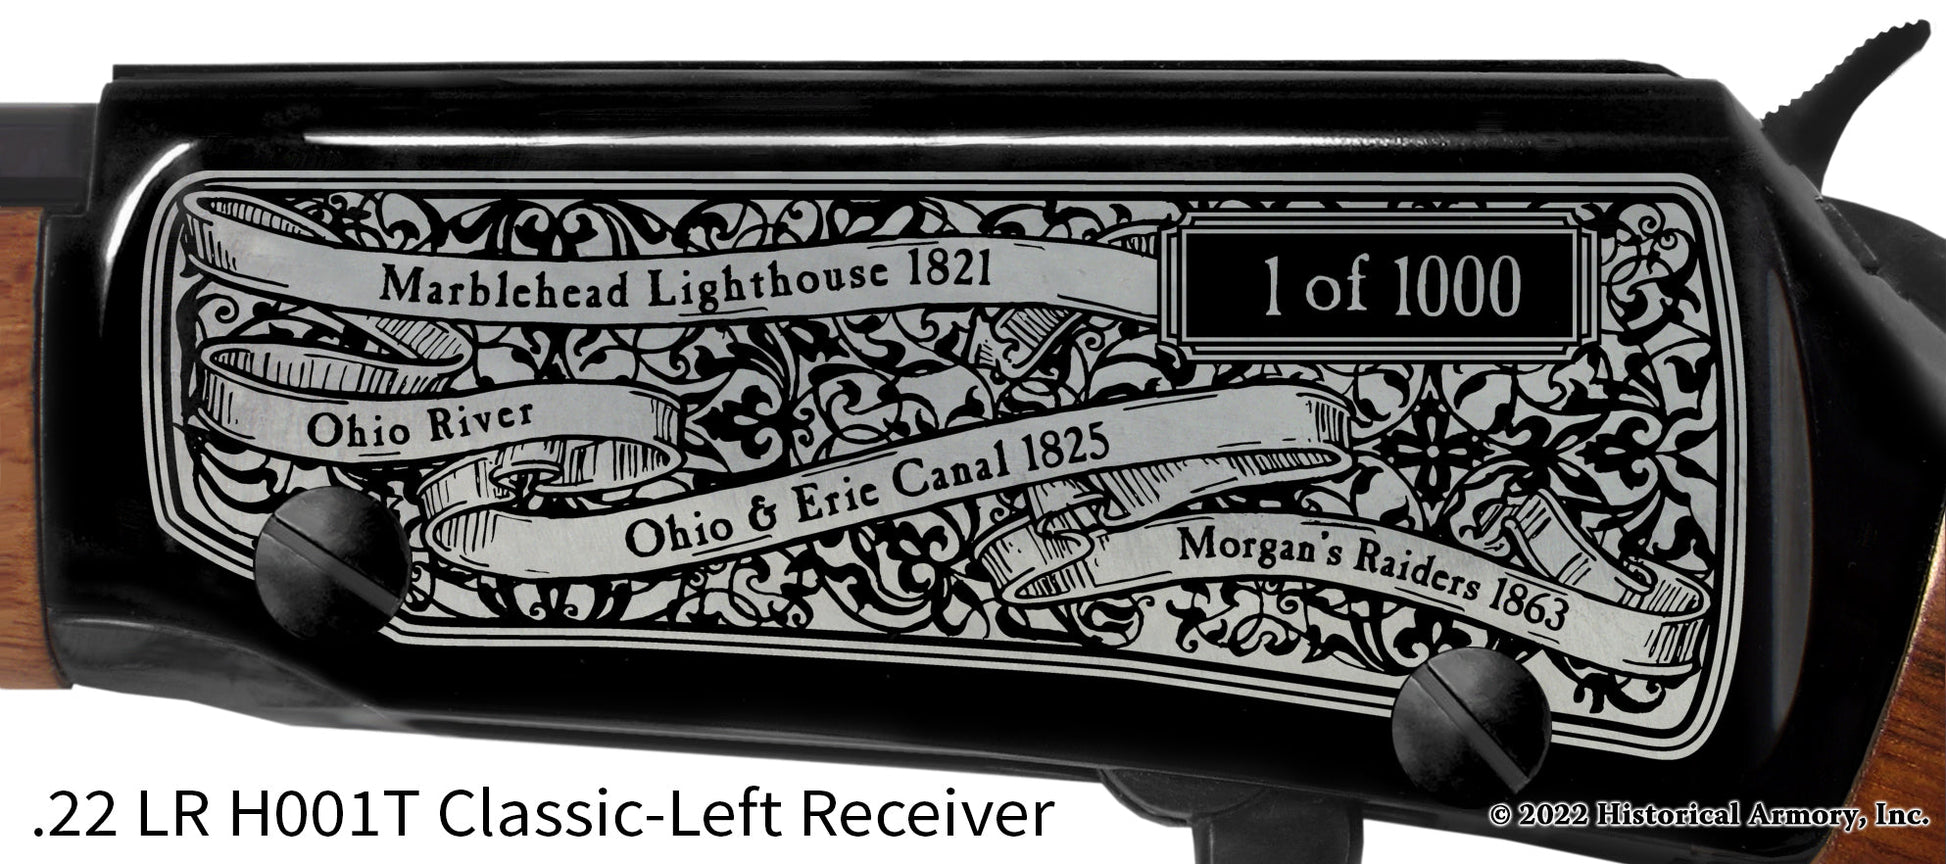 Ohio State Pride Engraved H00T Receiver detail Henry Rifle